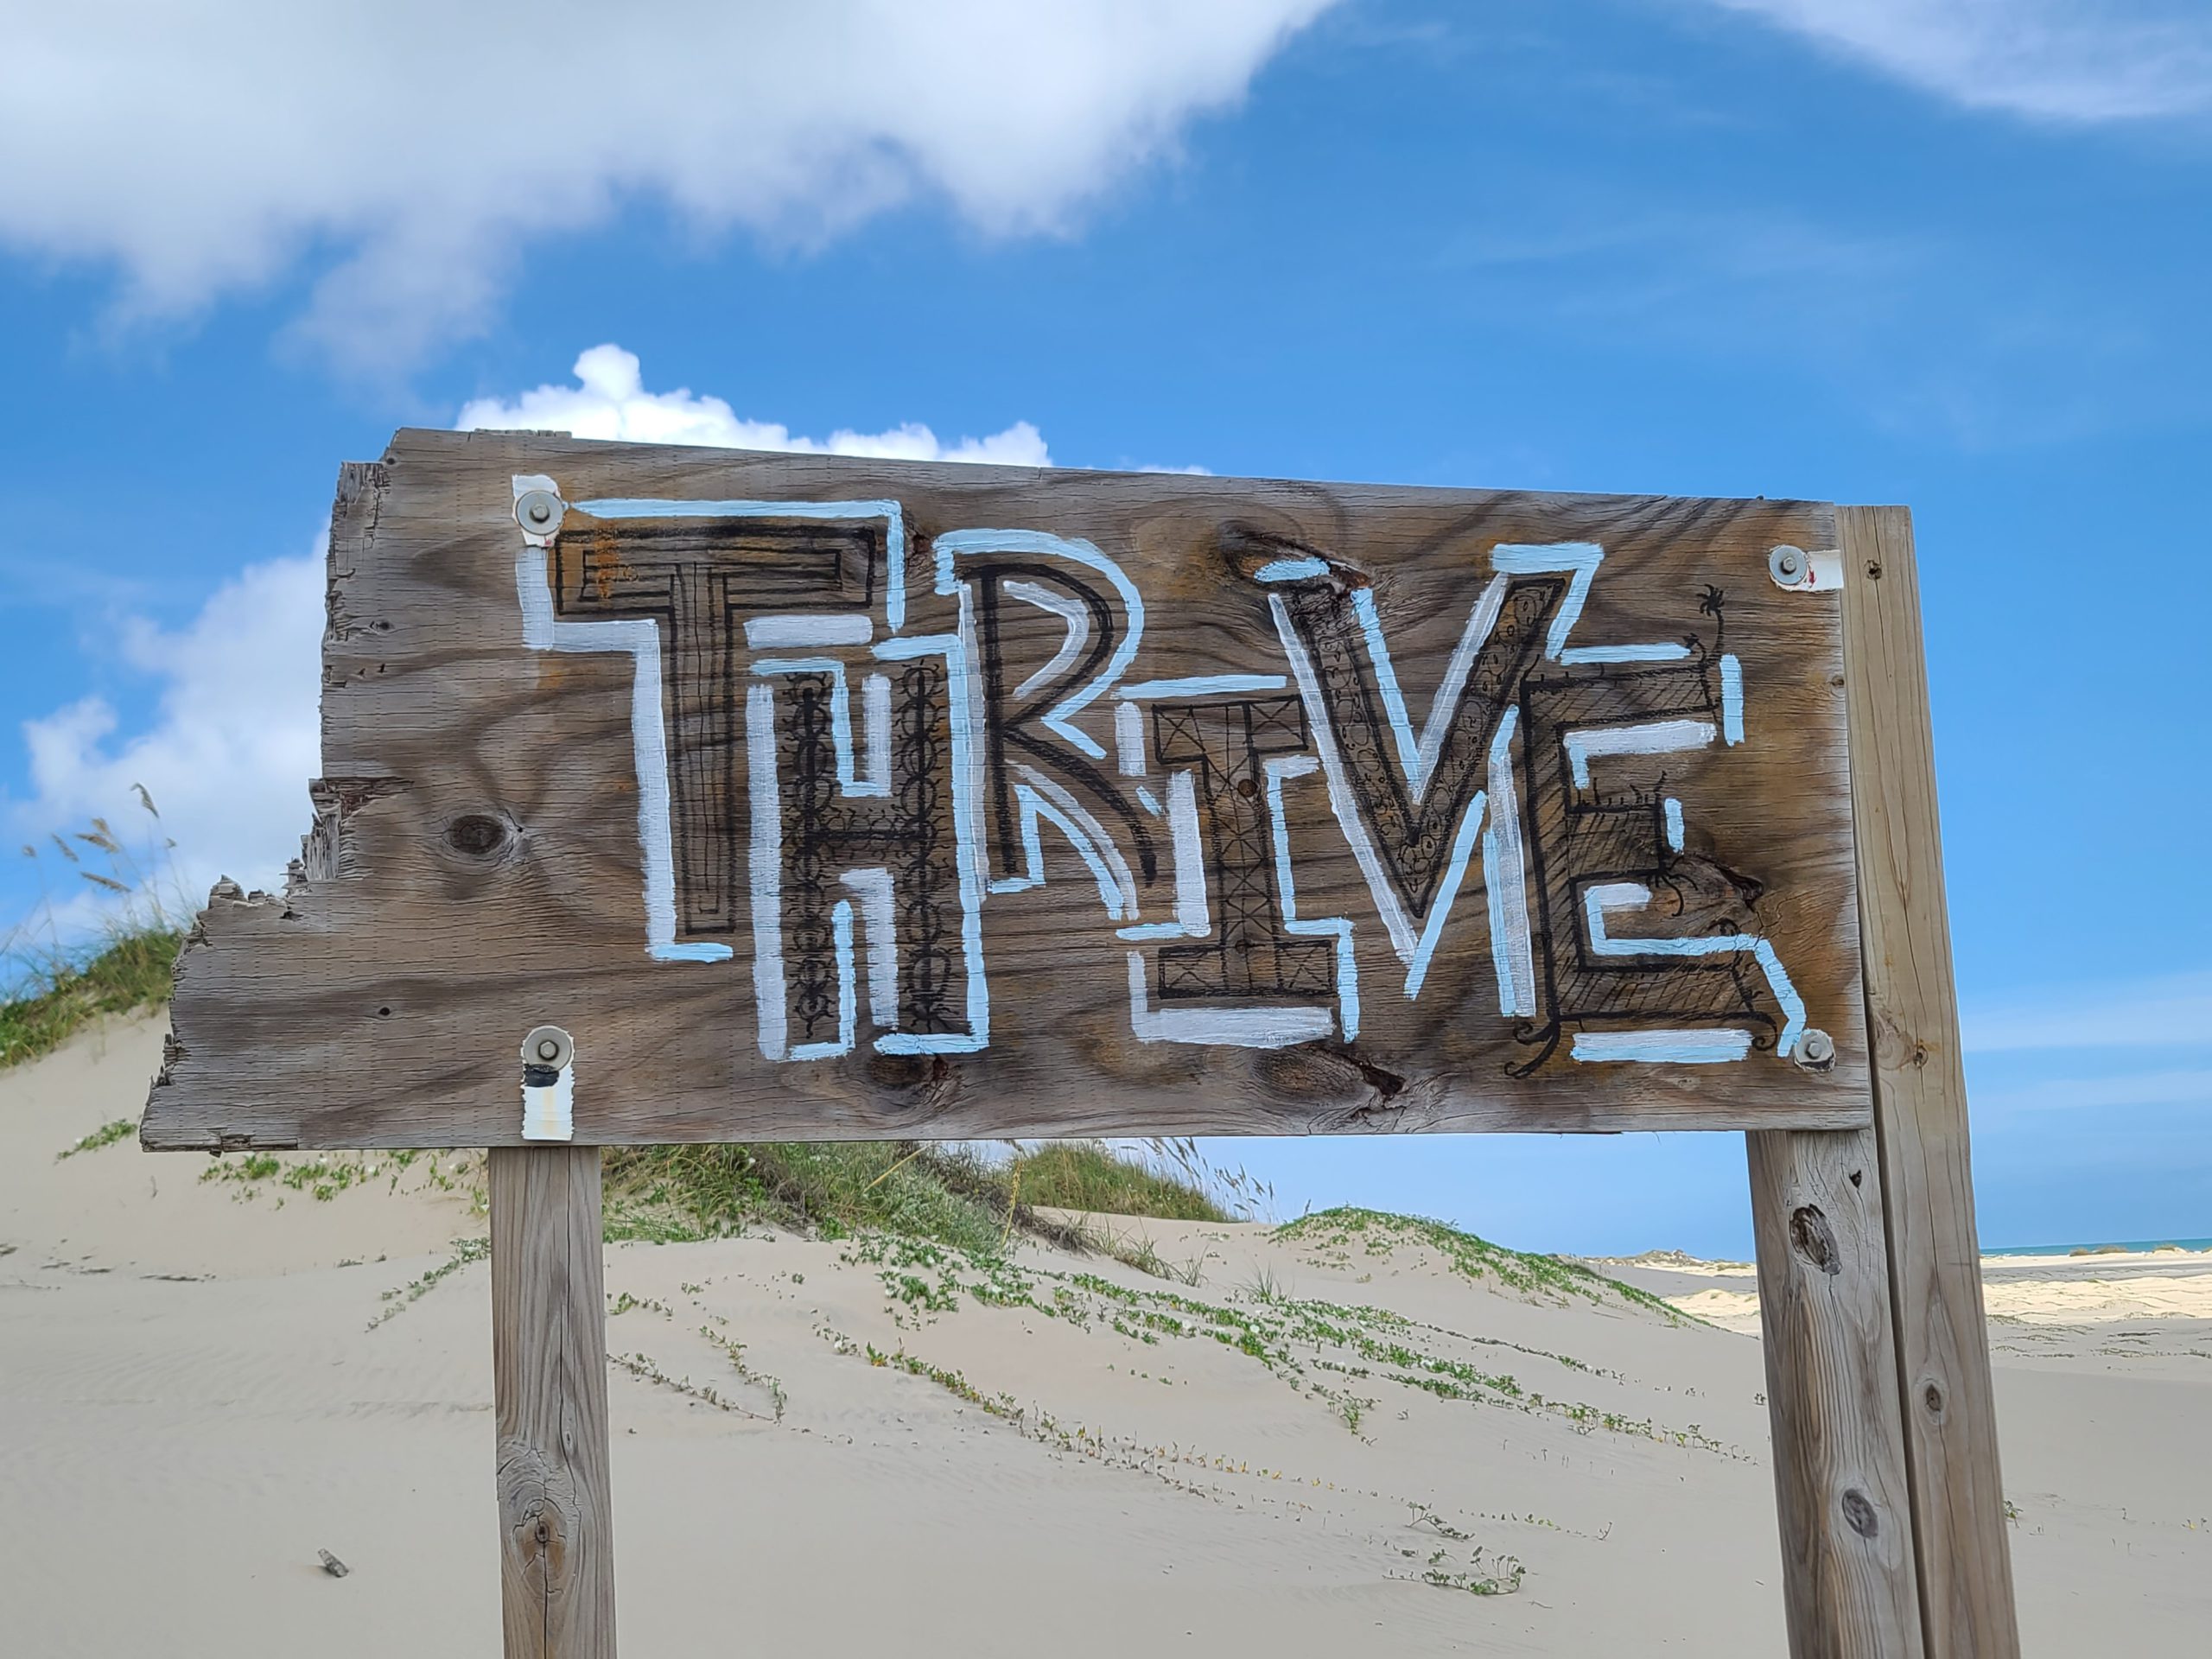 Small freight brokers thrive sign at the beach